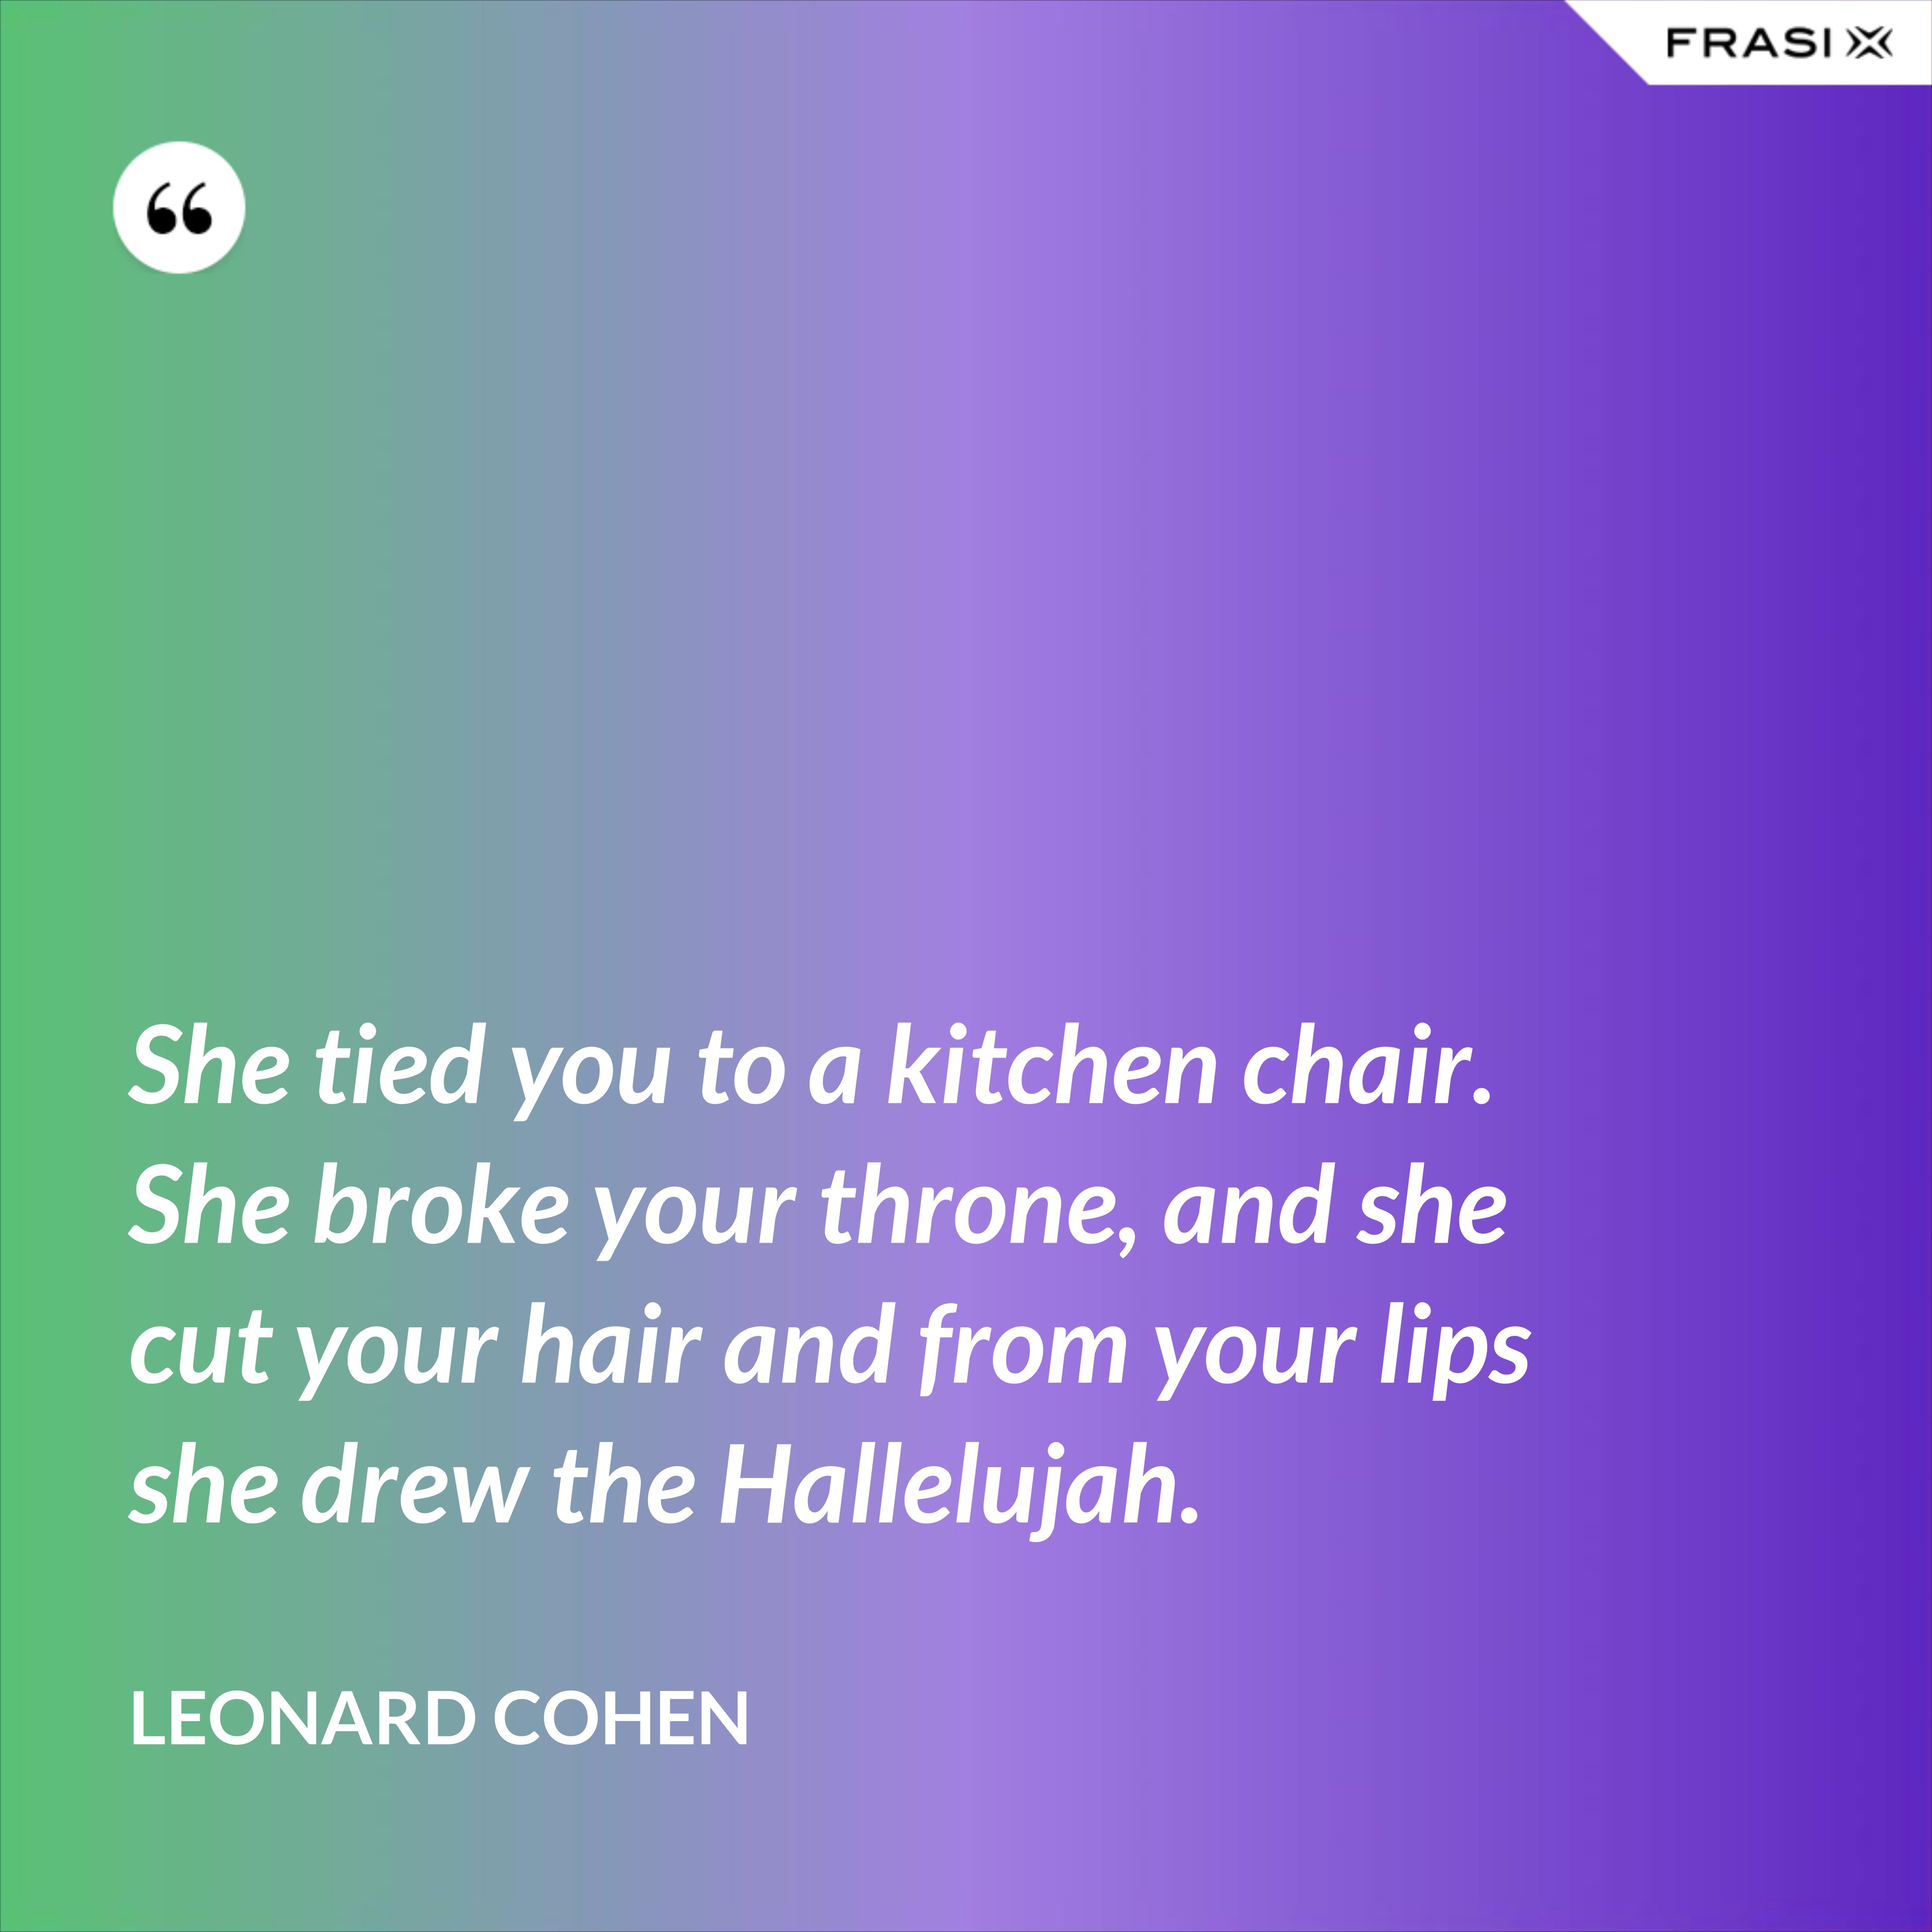 She tied you to a kitchen chair. She broke your throne, and she cut your hair and from your lips she drew the Hallelujah. - Leonard Cohen